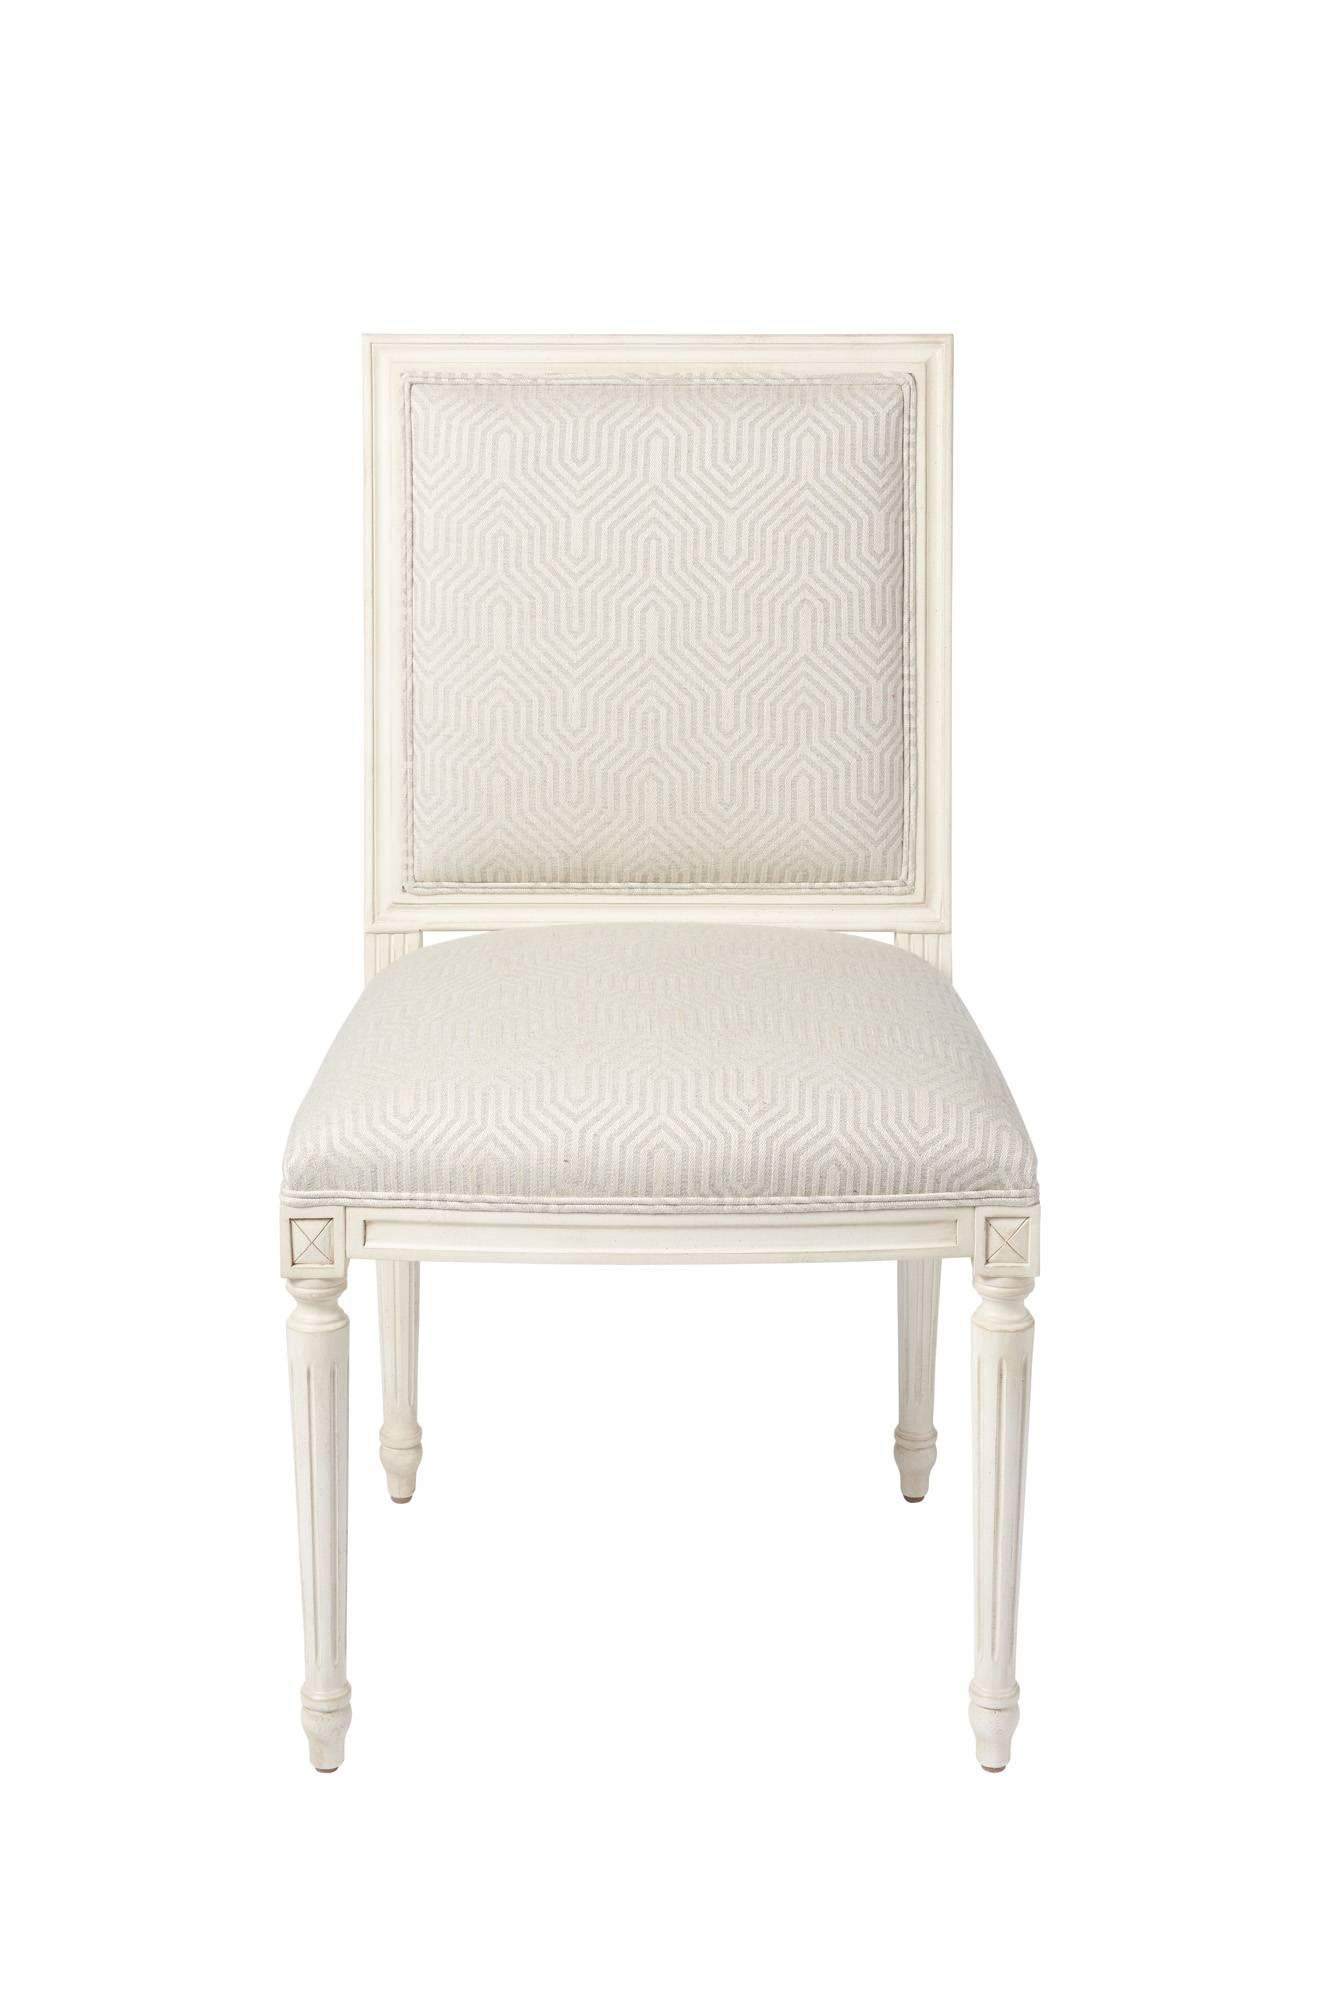 Contemporary Schumacher Marie Therese Eureka Woven Ziggurat Hand-Carved Beechwood Side Chair For Sale